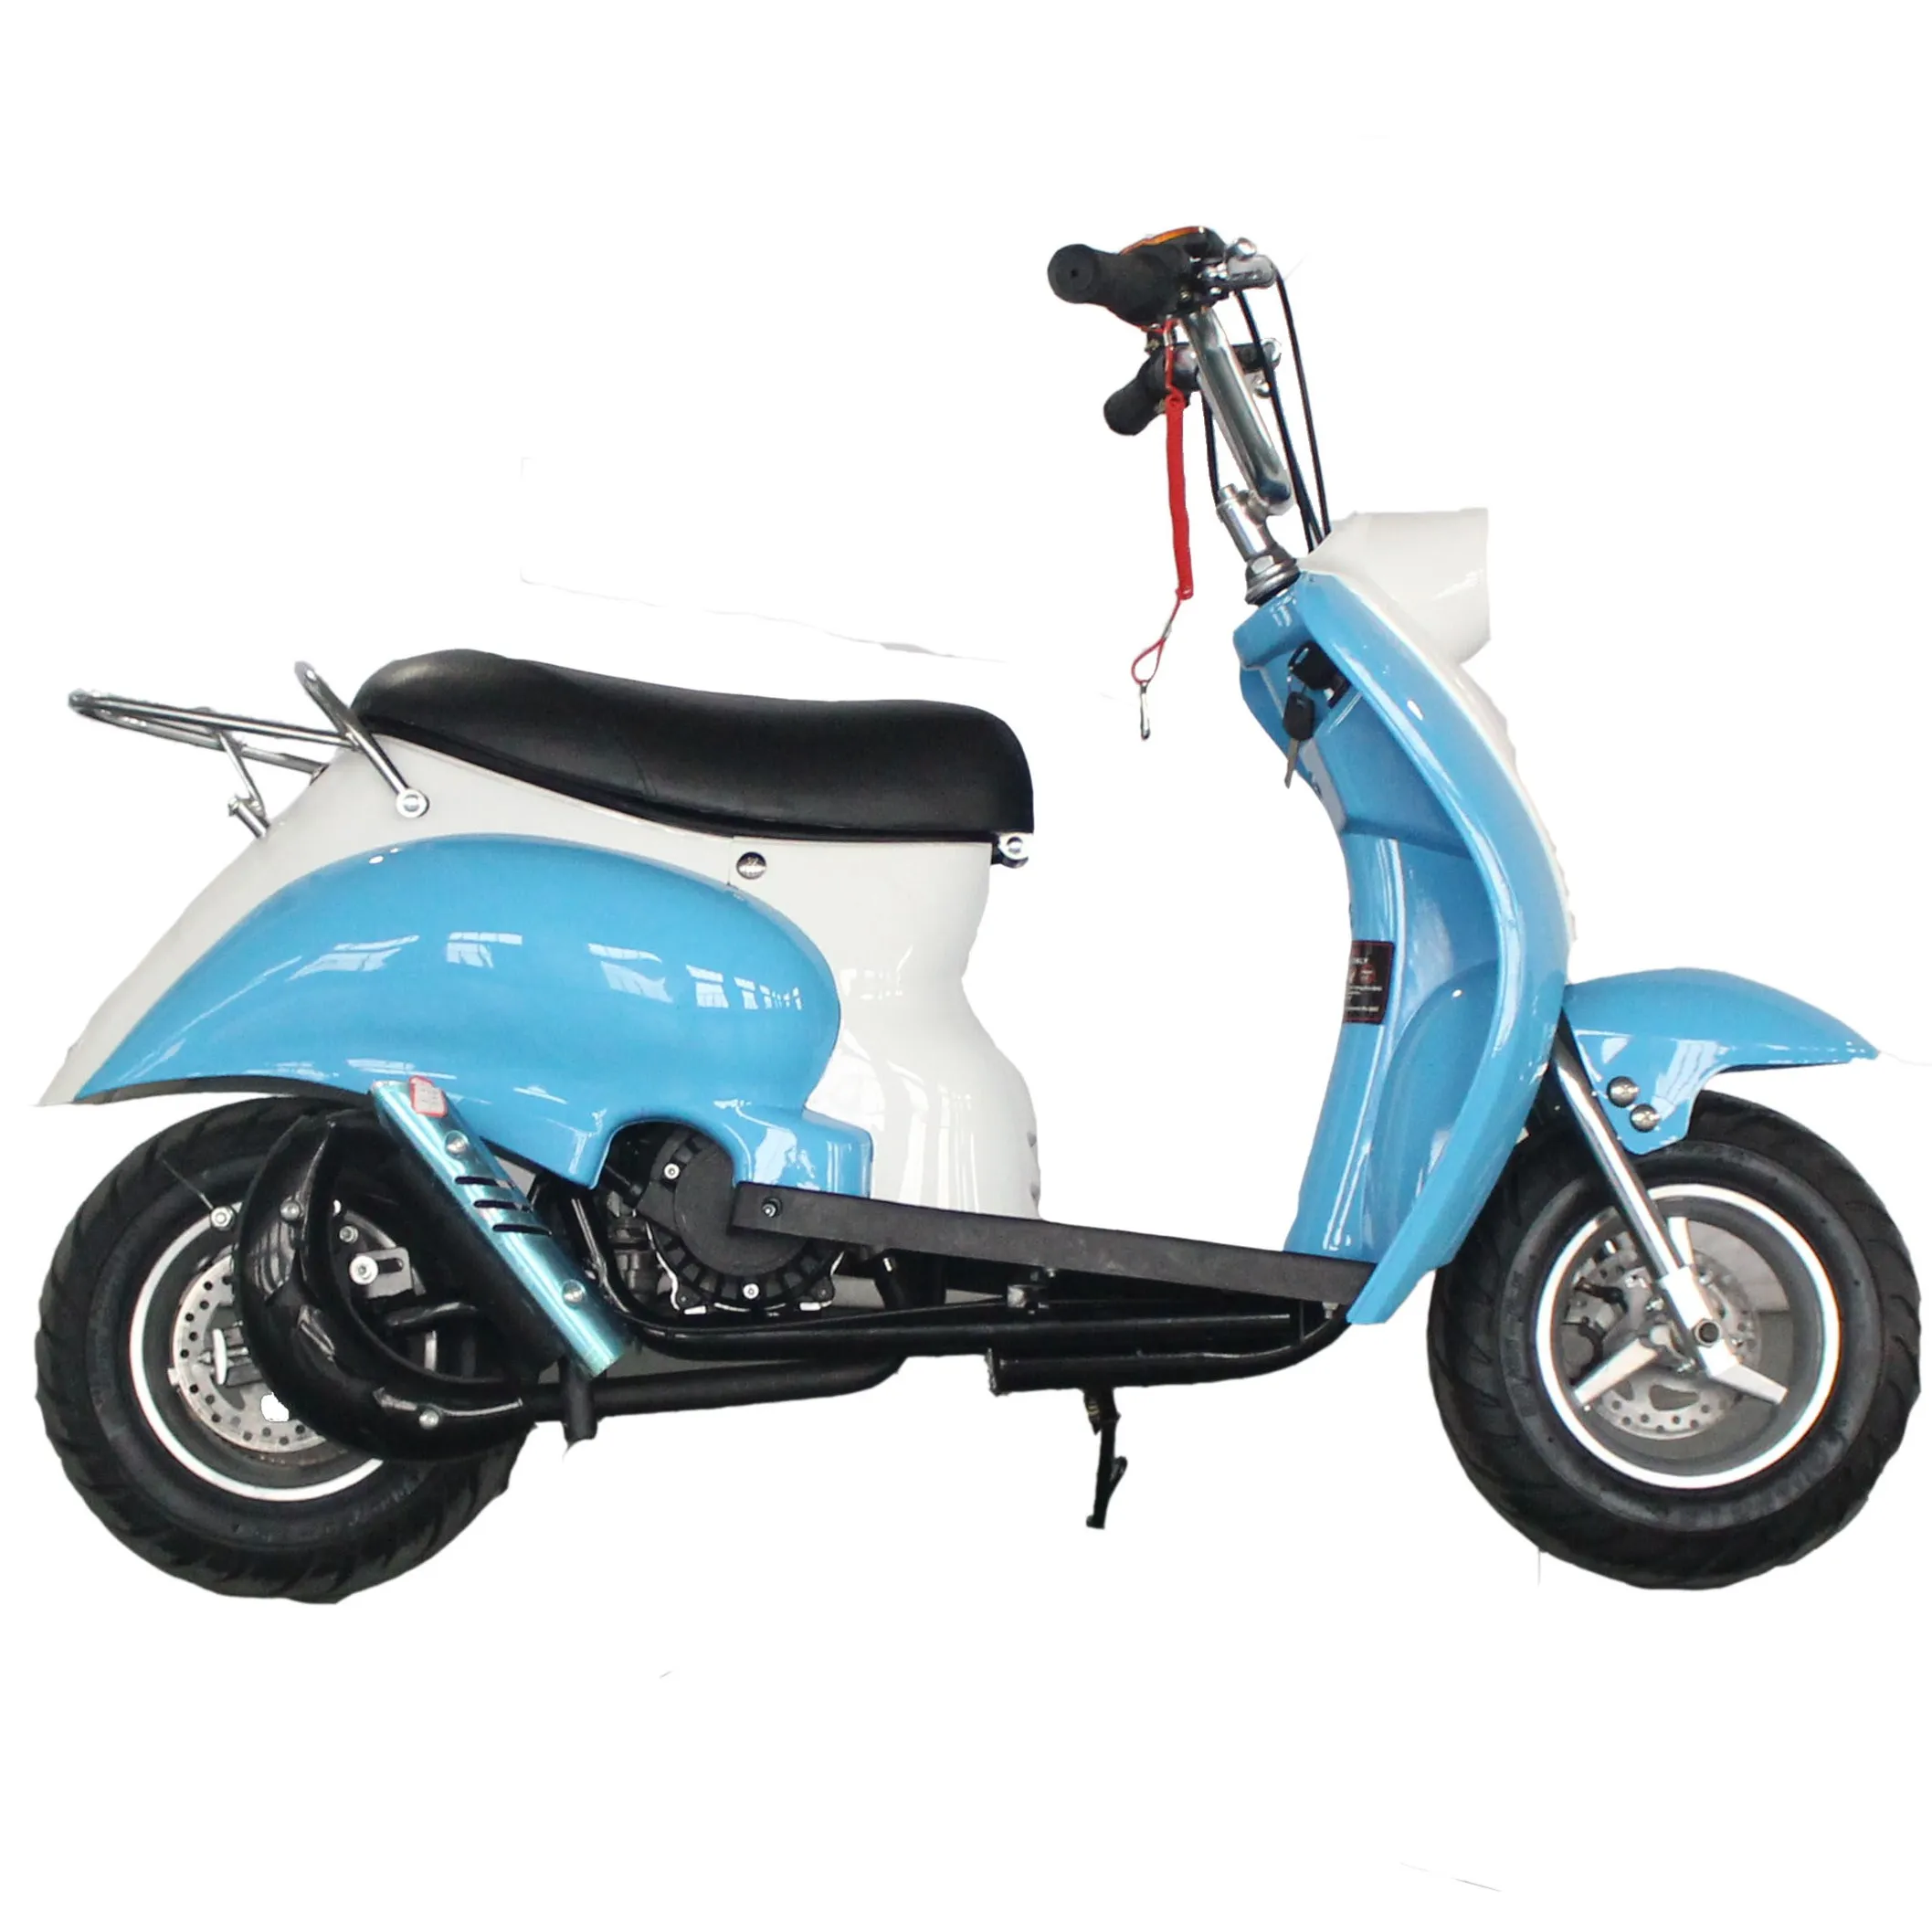 Source Mini 50cc scooter for kids on m.alibaba.com